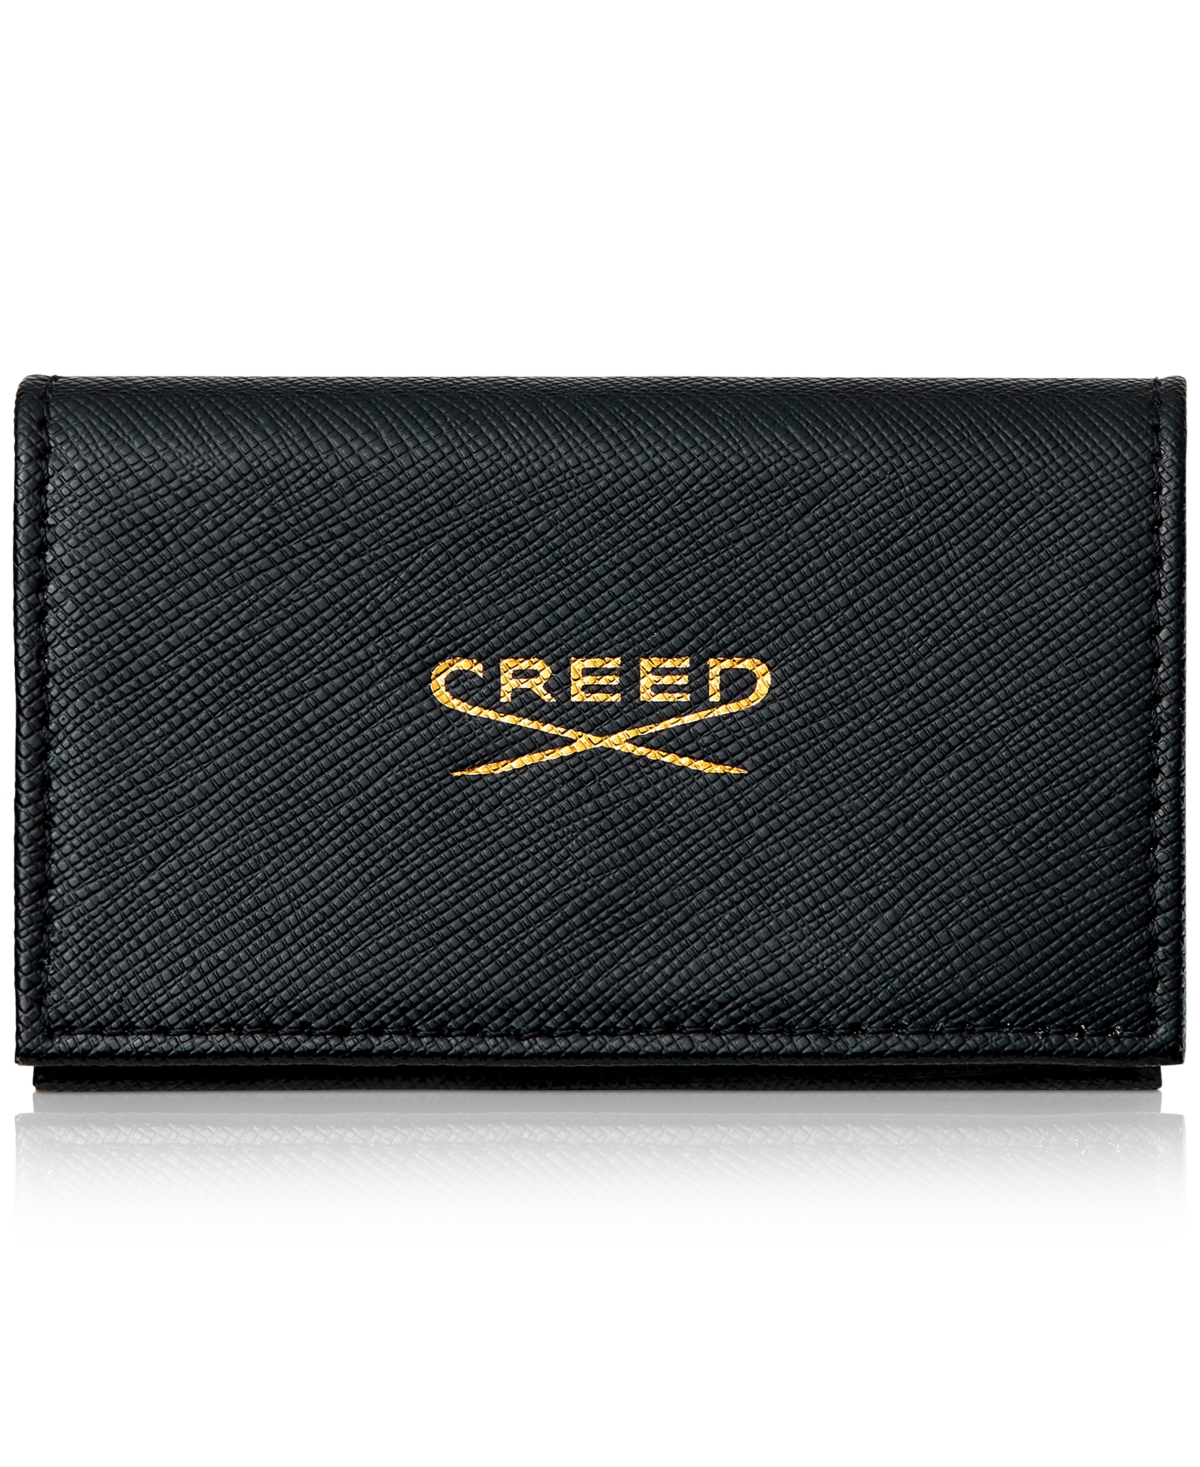 Creed Men's 9-pc. Black Leather Wallet Gift Set